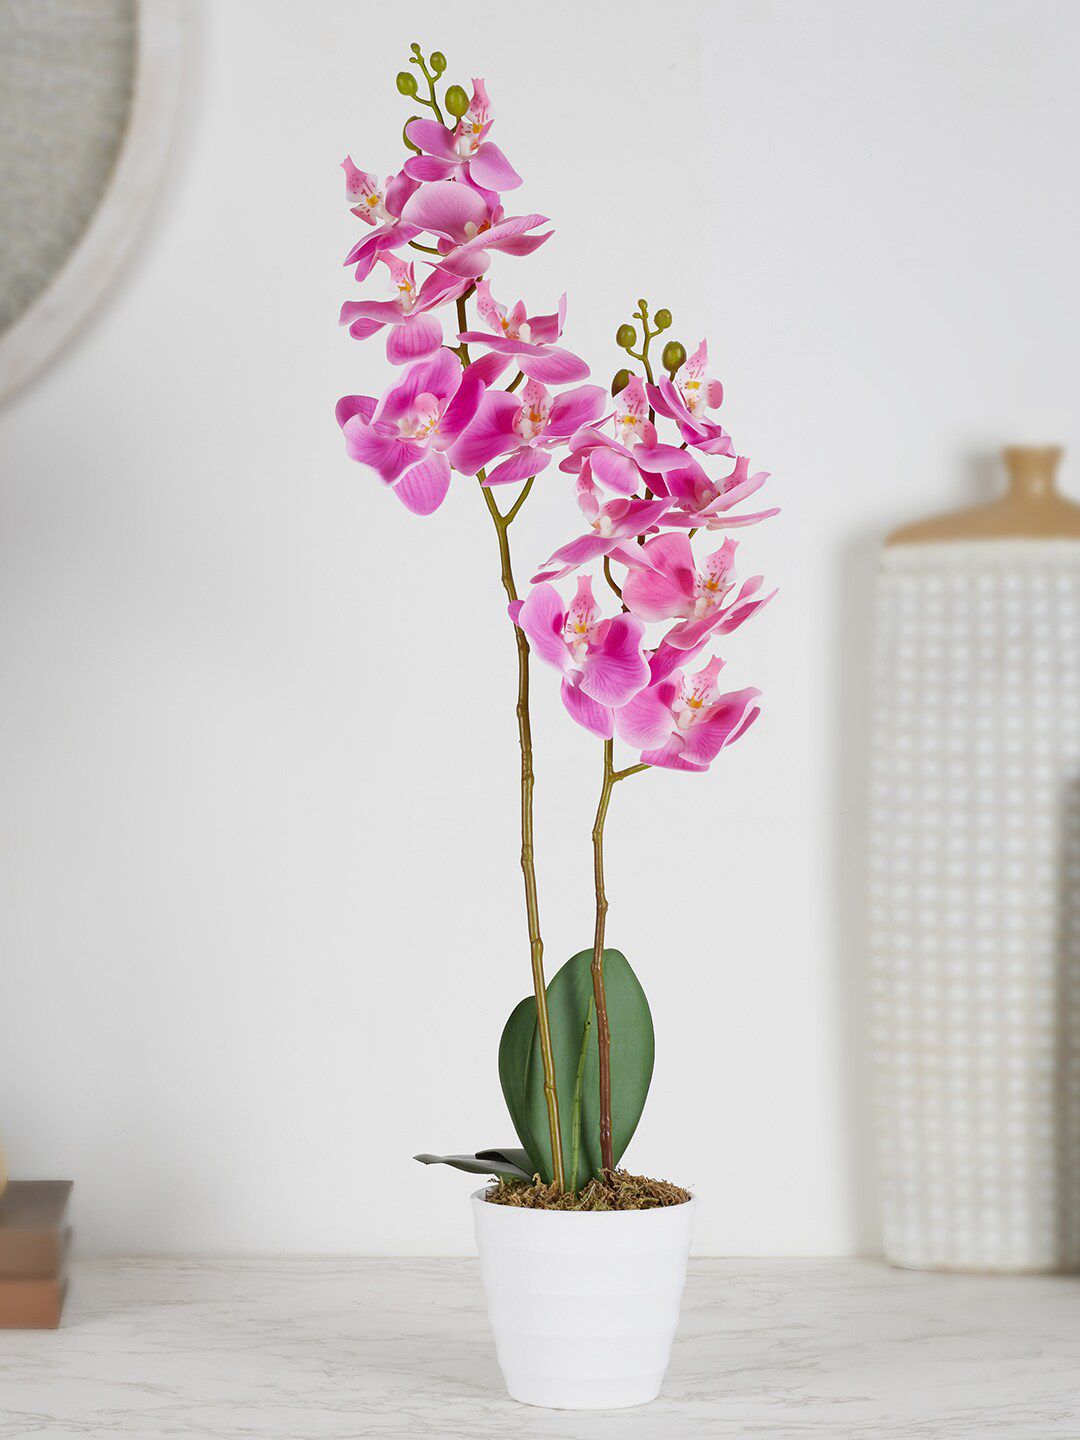 HomeTown Green & Pink Orchid Artificial Flowers & Plants With Pot Price in India